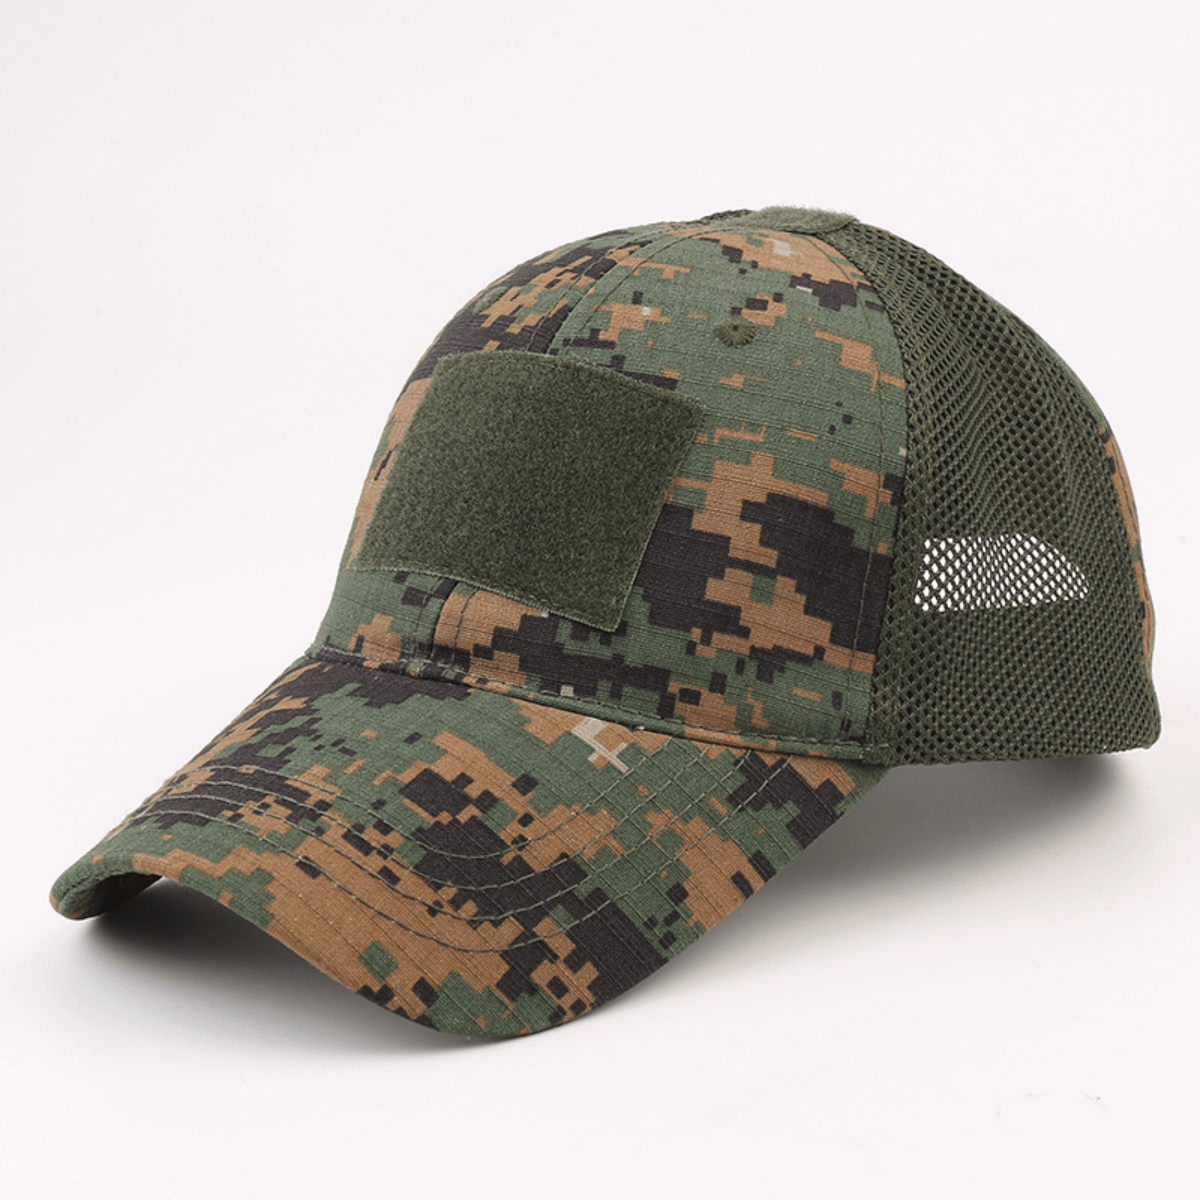 Military-Style Adjustable Hat with Strap Patch – Tactical Urbanheer